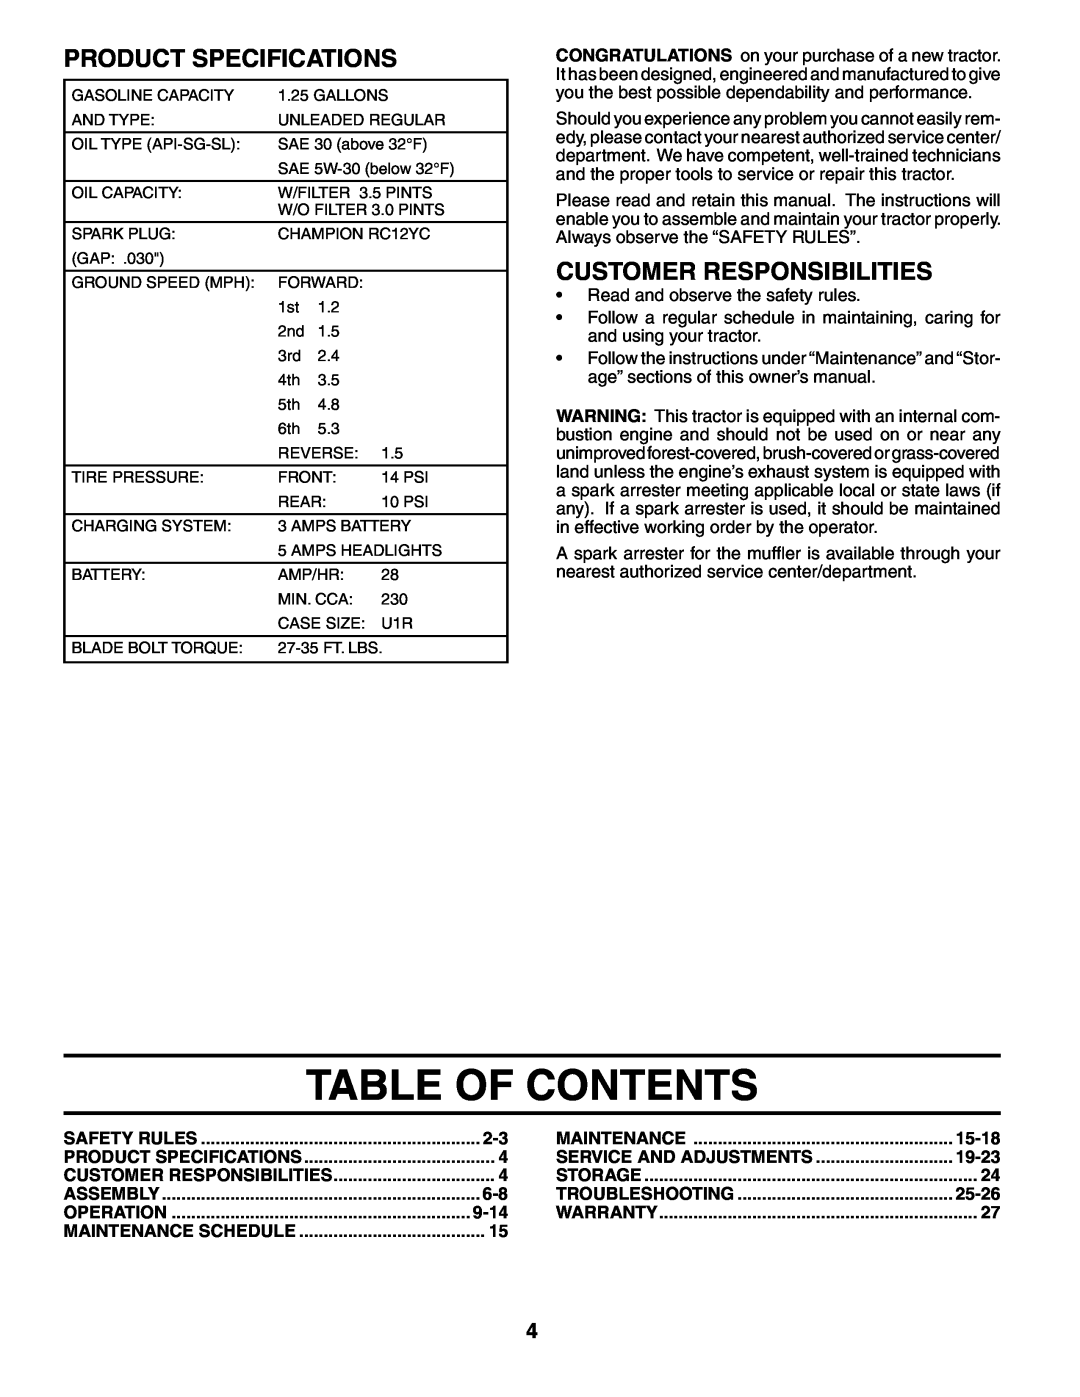 Poulan 194632 manual Table Of Contents, Product Specifications, Customer Responsibilities 